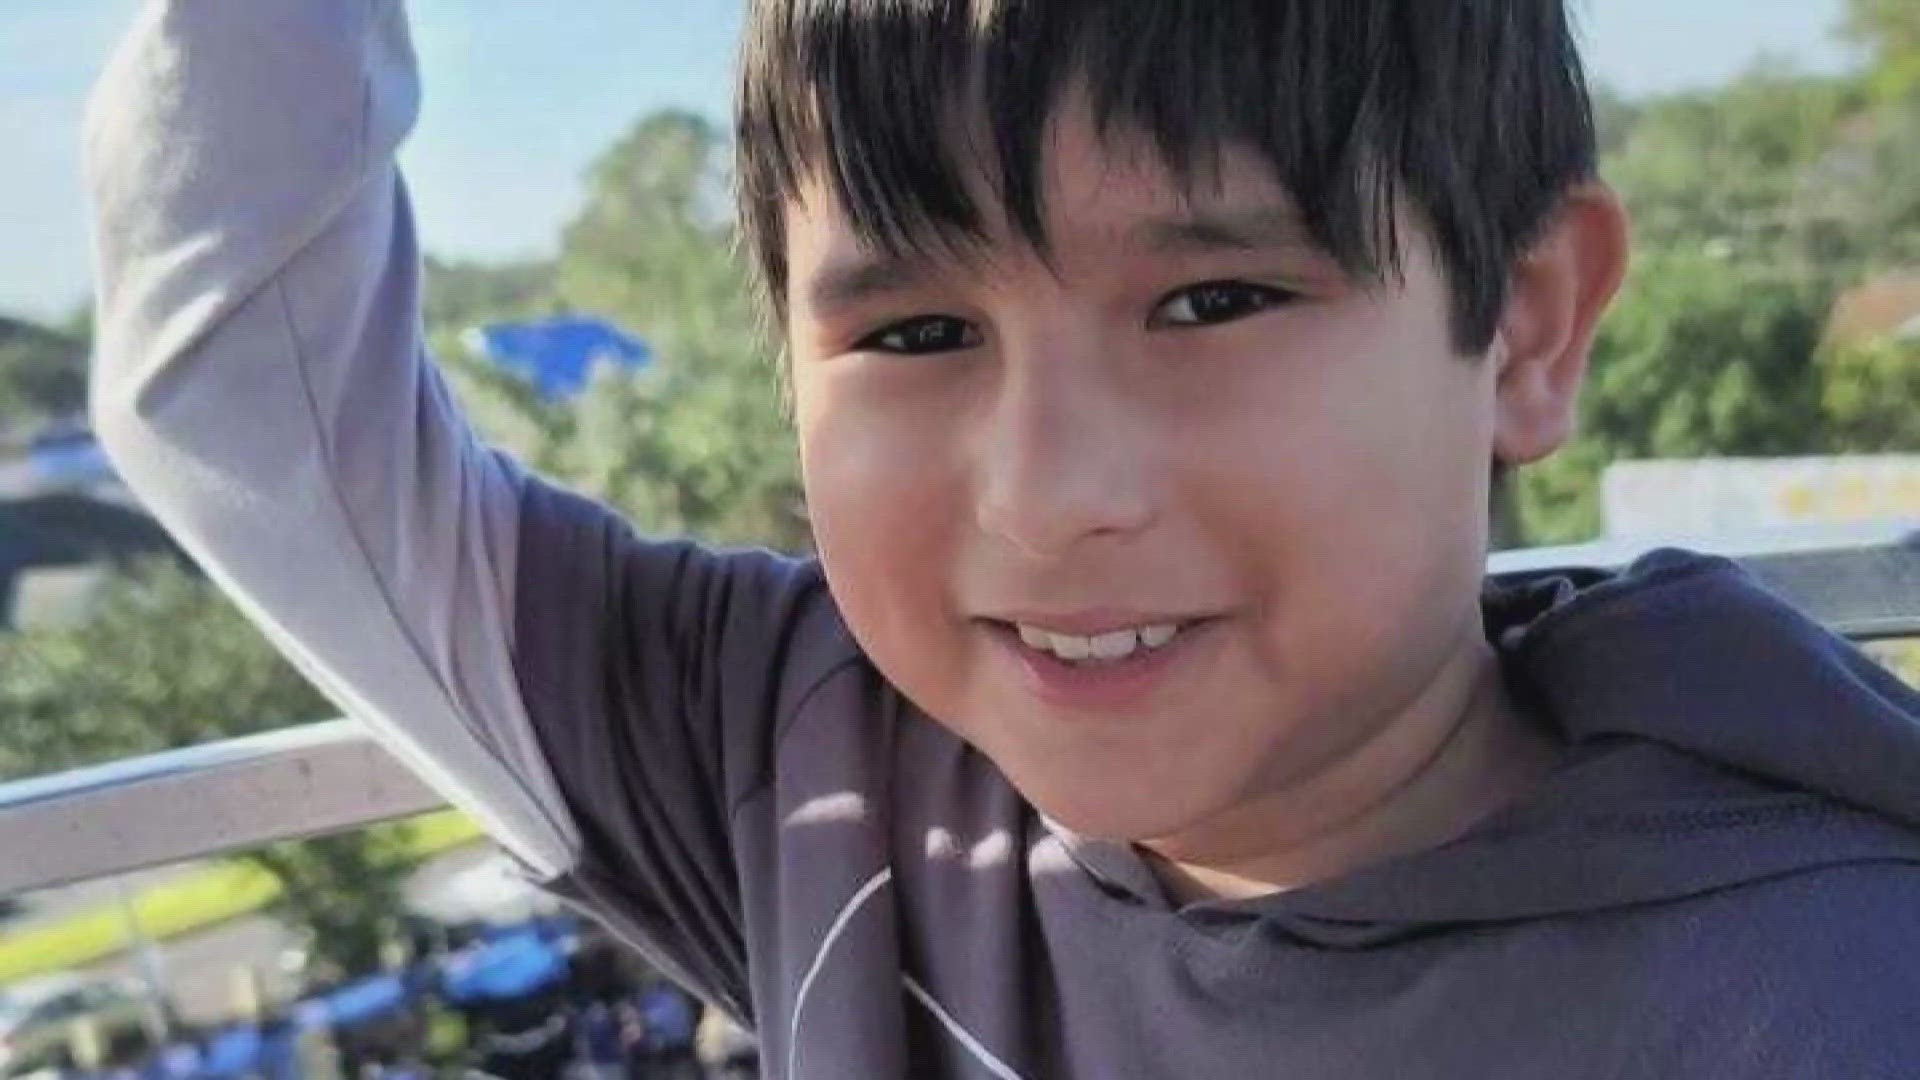 Thursday, his family announced they have made the difficult and selfless decision to donate his organs. They learned Wednesday that Adrian Fajardo was brain-dead.